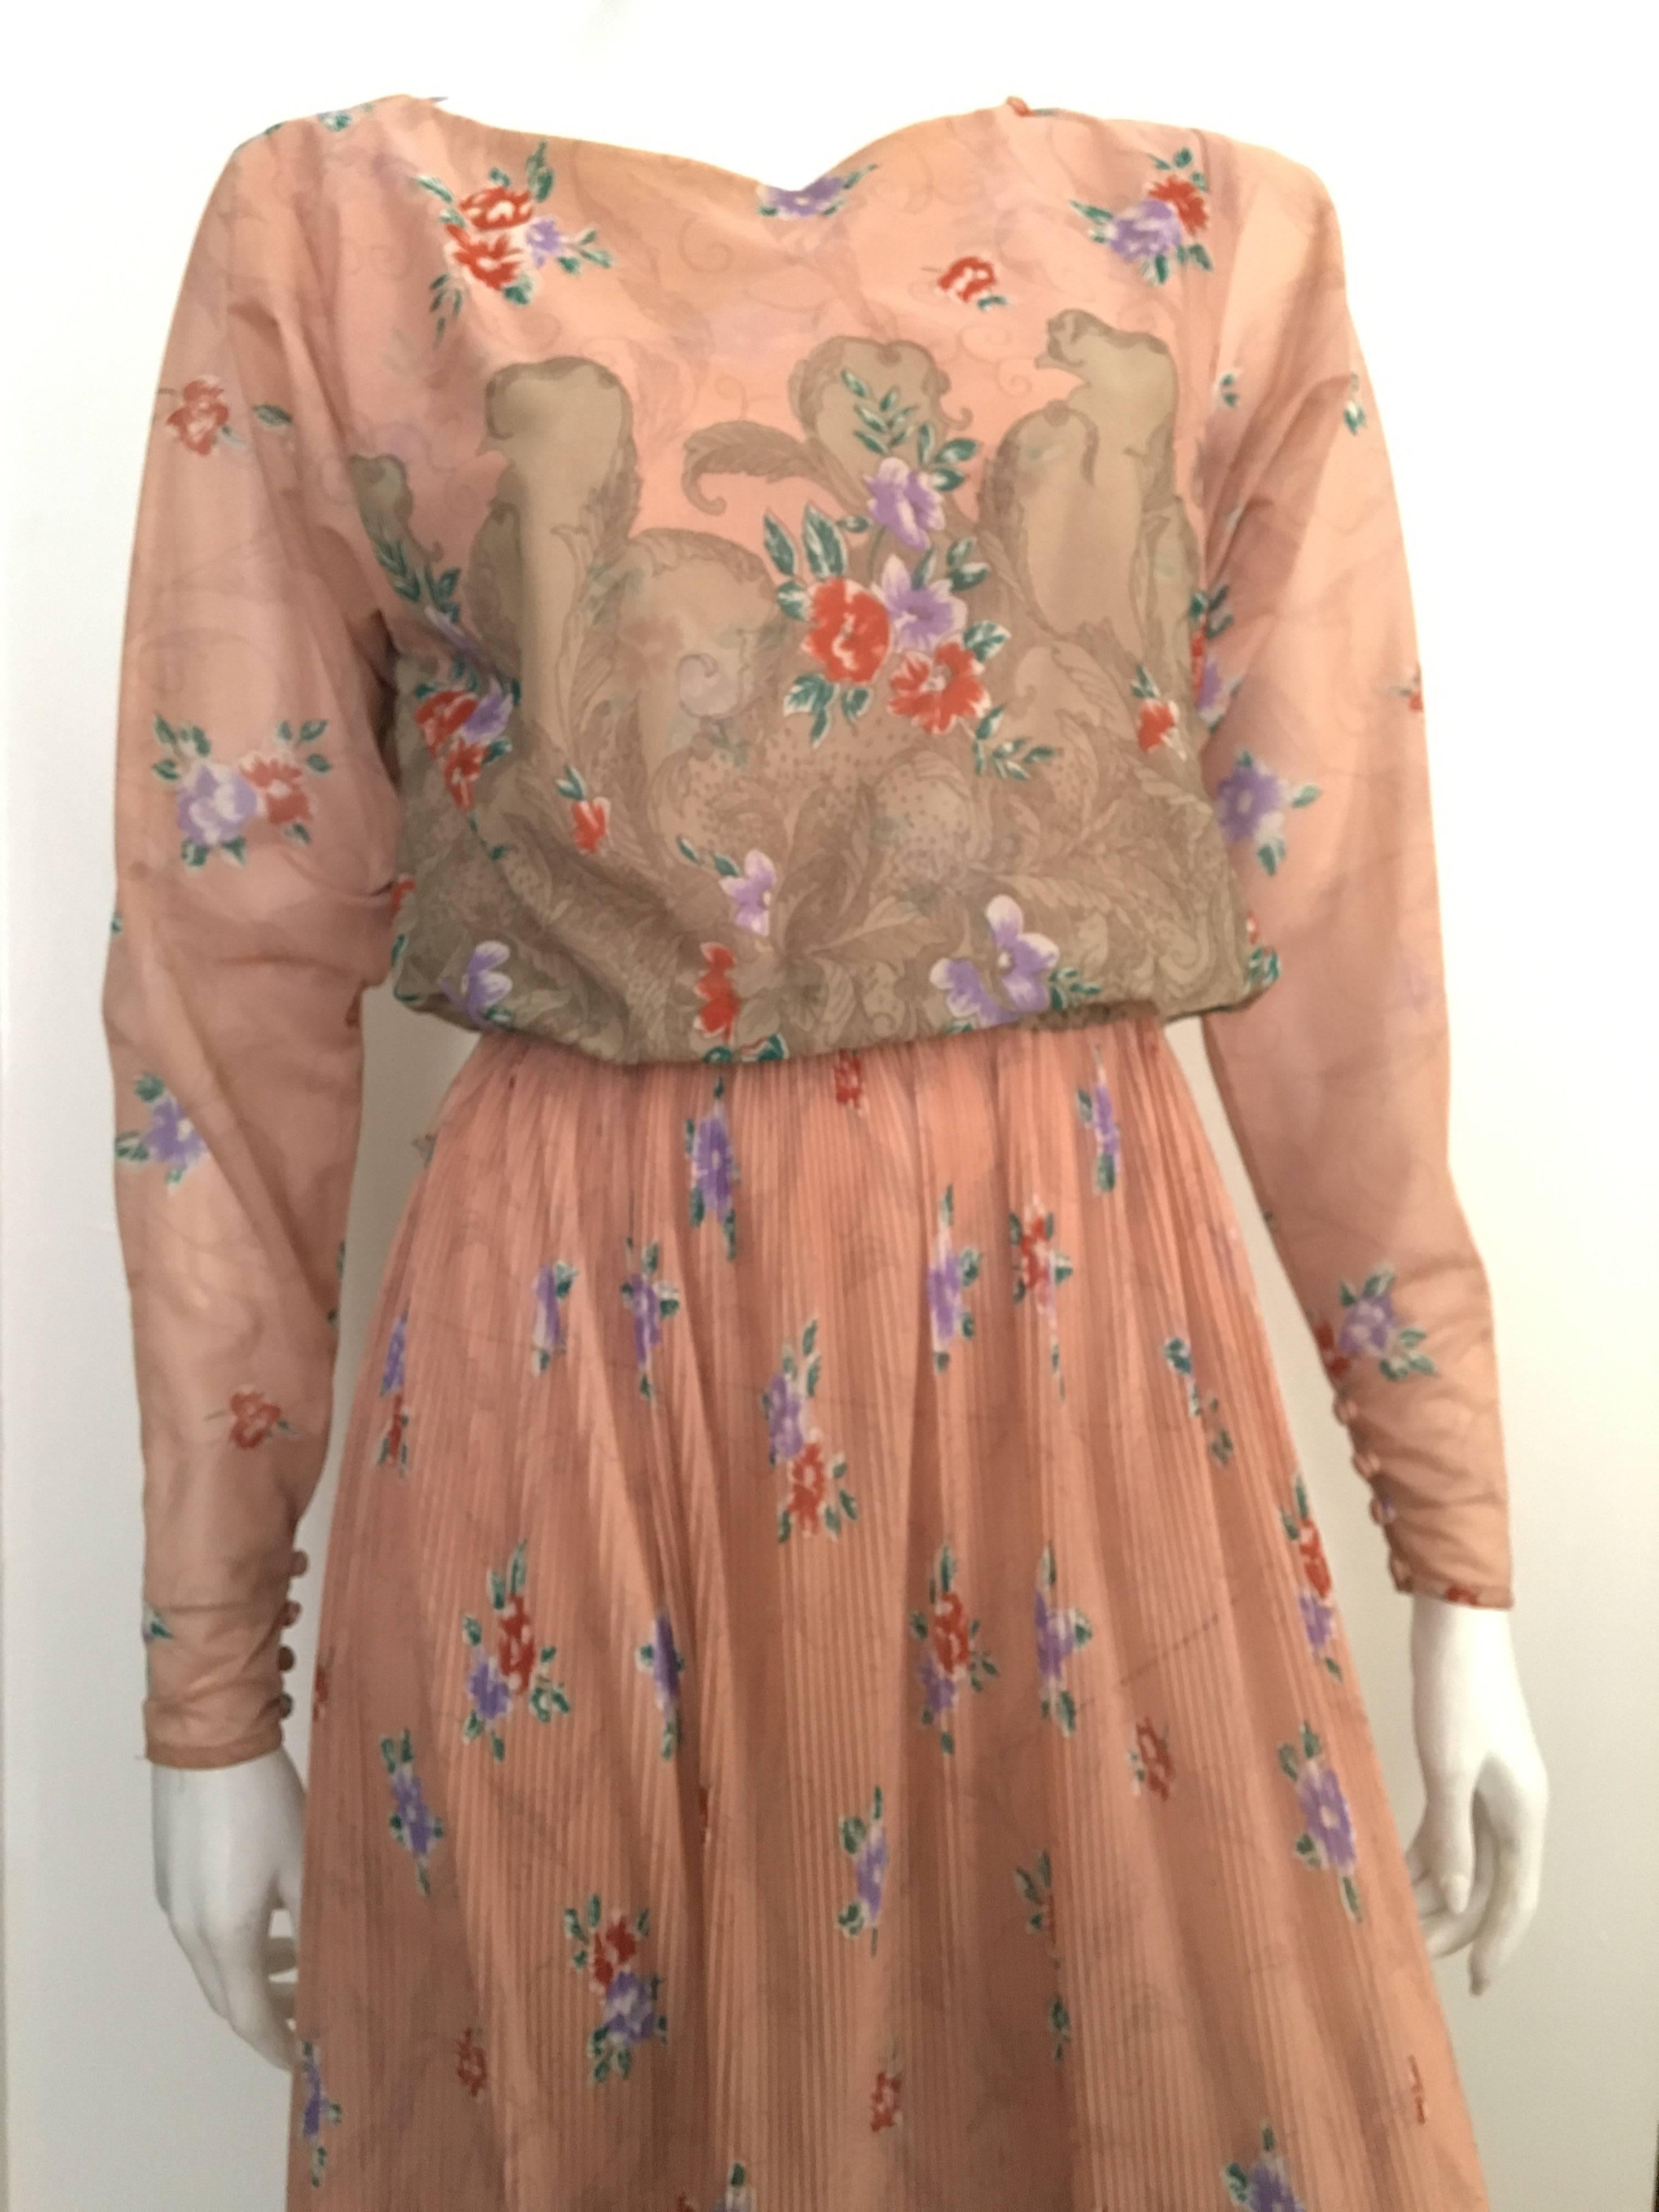 Neiman Marcus 1970s peach floral Asian inspired dress is a vintage size 7-8 but fits like a modern USA size 4.  Ladies please use your tape measure to properly measure your lovely body so you know for certain this will fit to perfection. Top part of